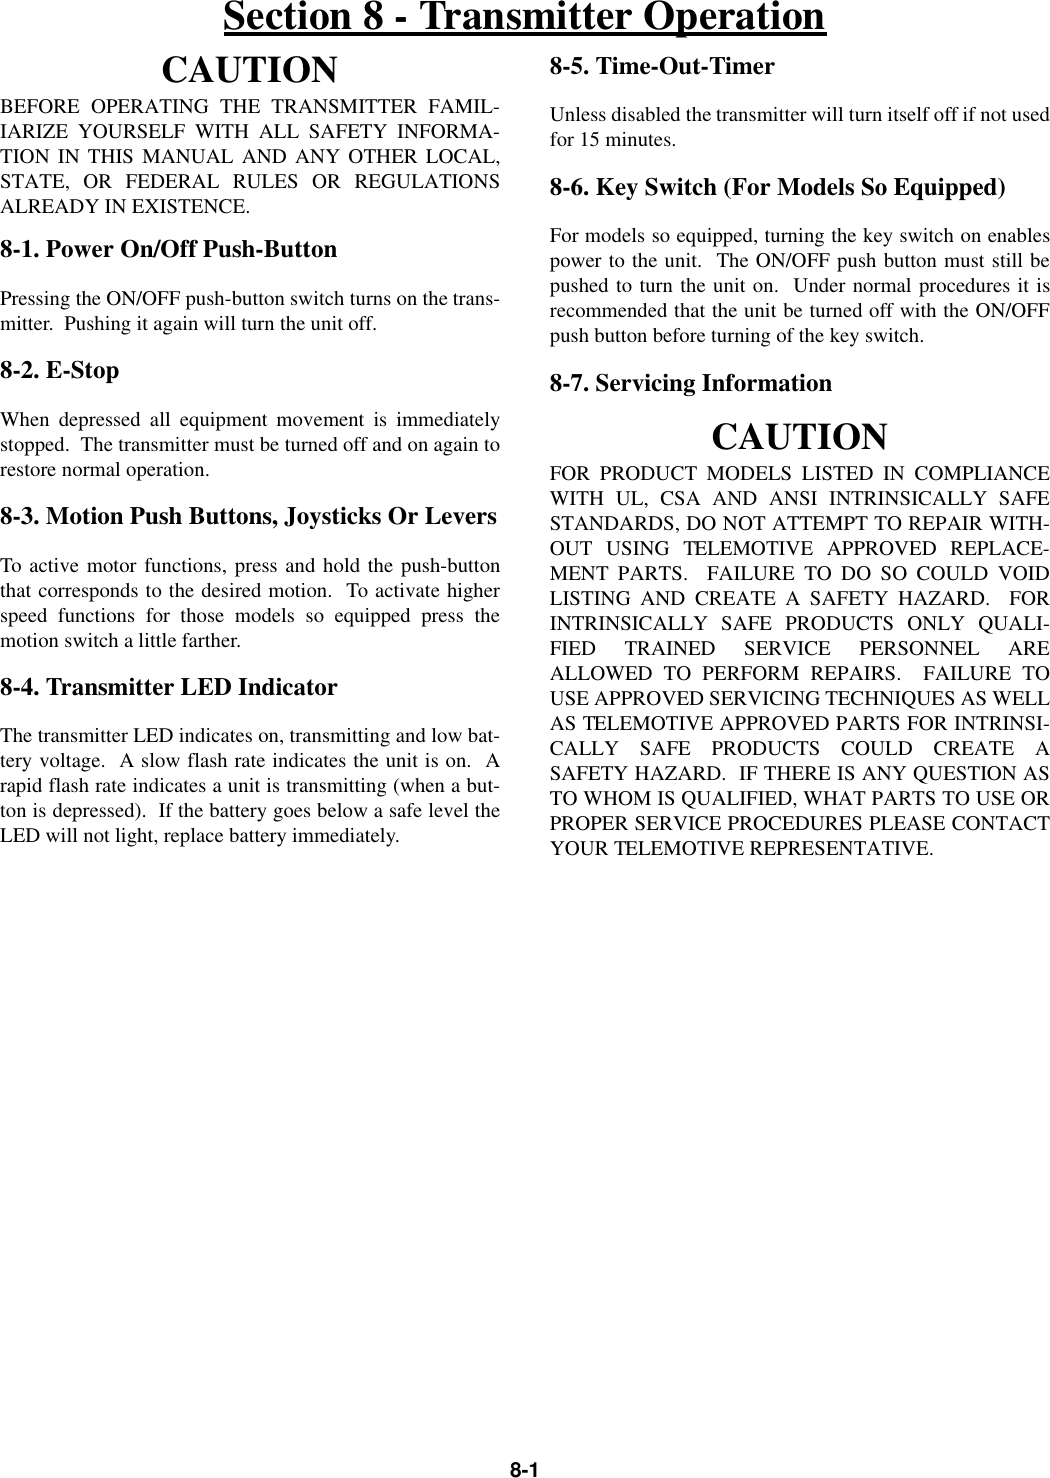 8-1CAUTIONBEFORE OPERATING THE TRANSMITTER FAMIL-IARIZE YOURSELF WITH ALL SAFETY INFORMA-TION IN THIS MANUAL AND ANY OTHER LOCAL,STATE, OR FEDERAL RULES OR REGULATIONSALREADY IN EXISTENCE.8-1. Power On/Off Push-ButtonPressing the ON/OFF push-button switch turns on the trans-mitter.  Pushing it again will turn the unit off.8-2. E-StopWhen depressed all equipment movement is immediatelystopped.  The transmitter must be turned off and on again torestore normal operation.8-3. Motion Push Buttons, Joysticks Or LeversTo active motor functions, press and hold the push-buttonthat corresponds to the desired motion.  To activate higherspeed functions for those models so equipped press themotion switch a little farther.8-4. Transmitter LED IndicatorThe transmitter LED indicates on, transmitting and low bat-tery voltage.  A slow flash rate indicates the unit is on.  Arapid flash rate indicates a unit is transmitting (when a but-ton is depressed).  If the battery goes below a safe level theLED will not light, replace battery immediately.8-5. Time-Out-TimerUnless disabled the transmitter will turn itself off if not usedfor 15 minutes.8-6. Key Switch (For Models So Equipped)For models so equipped, turning the key switch on enablespower to the unit.  The ON/OFF push button must still bepushed to turn the unit on.  Under normal procedures it isrecommended that the unit be turned off with the ON/OFFpush button before turning of the key switch.8-7. Servicing InformationCAUTIONFOR PRODUCT MODELS LISTED IN COMPLIANCEWITH UL, CSA AND ANSI INTRINSICALLY SAFESTANDARDS, DO NOT ATTEMPT TO REPAIR WITH-OUT USING TELEMOTIVE APPROVED REPLACE-MENT PARTS.  FAILURE TO DO SO COULD VOIDLISTING AND CREATE A SAFETY HAZARD.  FORINTRINSICALLY SAFE PRODUCTS ONLY QUALI-FIED TRAINED SERVICE PERSONNEL AREALLOWED TO PERFORM REPAIRS.  FAILURE TOUSE APPROVED SERVICING TECHNIQUES AS WELLAS TELEMOTIVE APPROVED PARTS FOR INTRINSI-CALLY SAFE PRODUCTS COULD CREATE ASAFETY HAZARD.  IF THERE IS ANY QUESTION ASTO WHOM IS QUALIFIED, WHAT PARTS TO USE ORPROPER SERVICE PROCEDURES PLEASE CONTACTYOUR TELEMOTIVE REPRESENTATIVE.Section 8 - Transmitter Operation